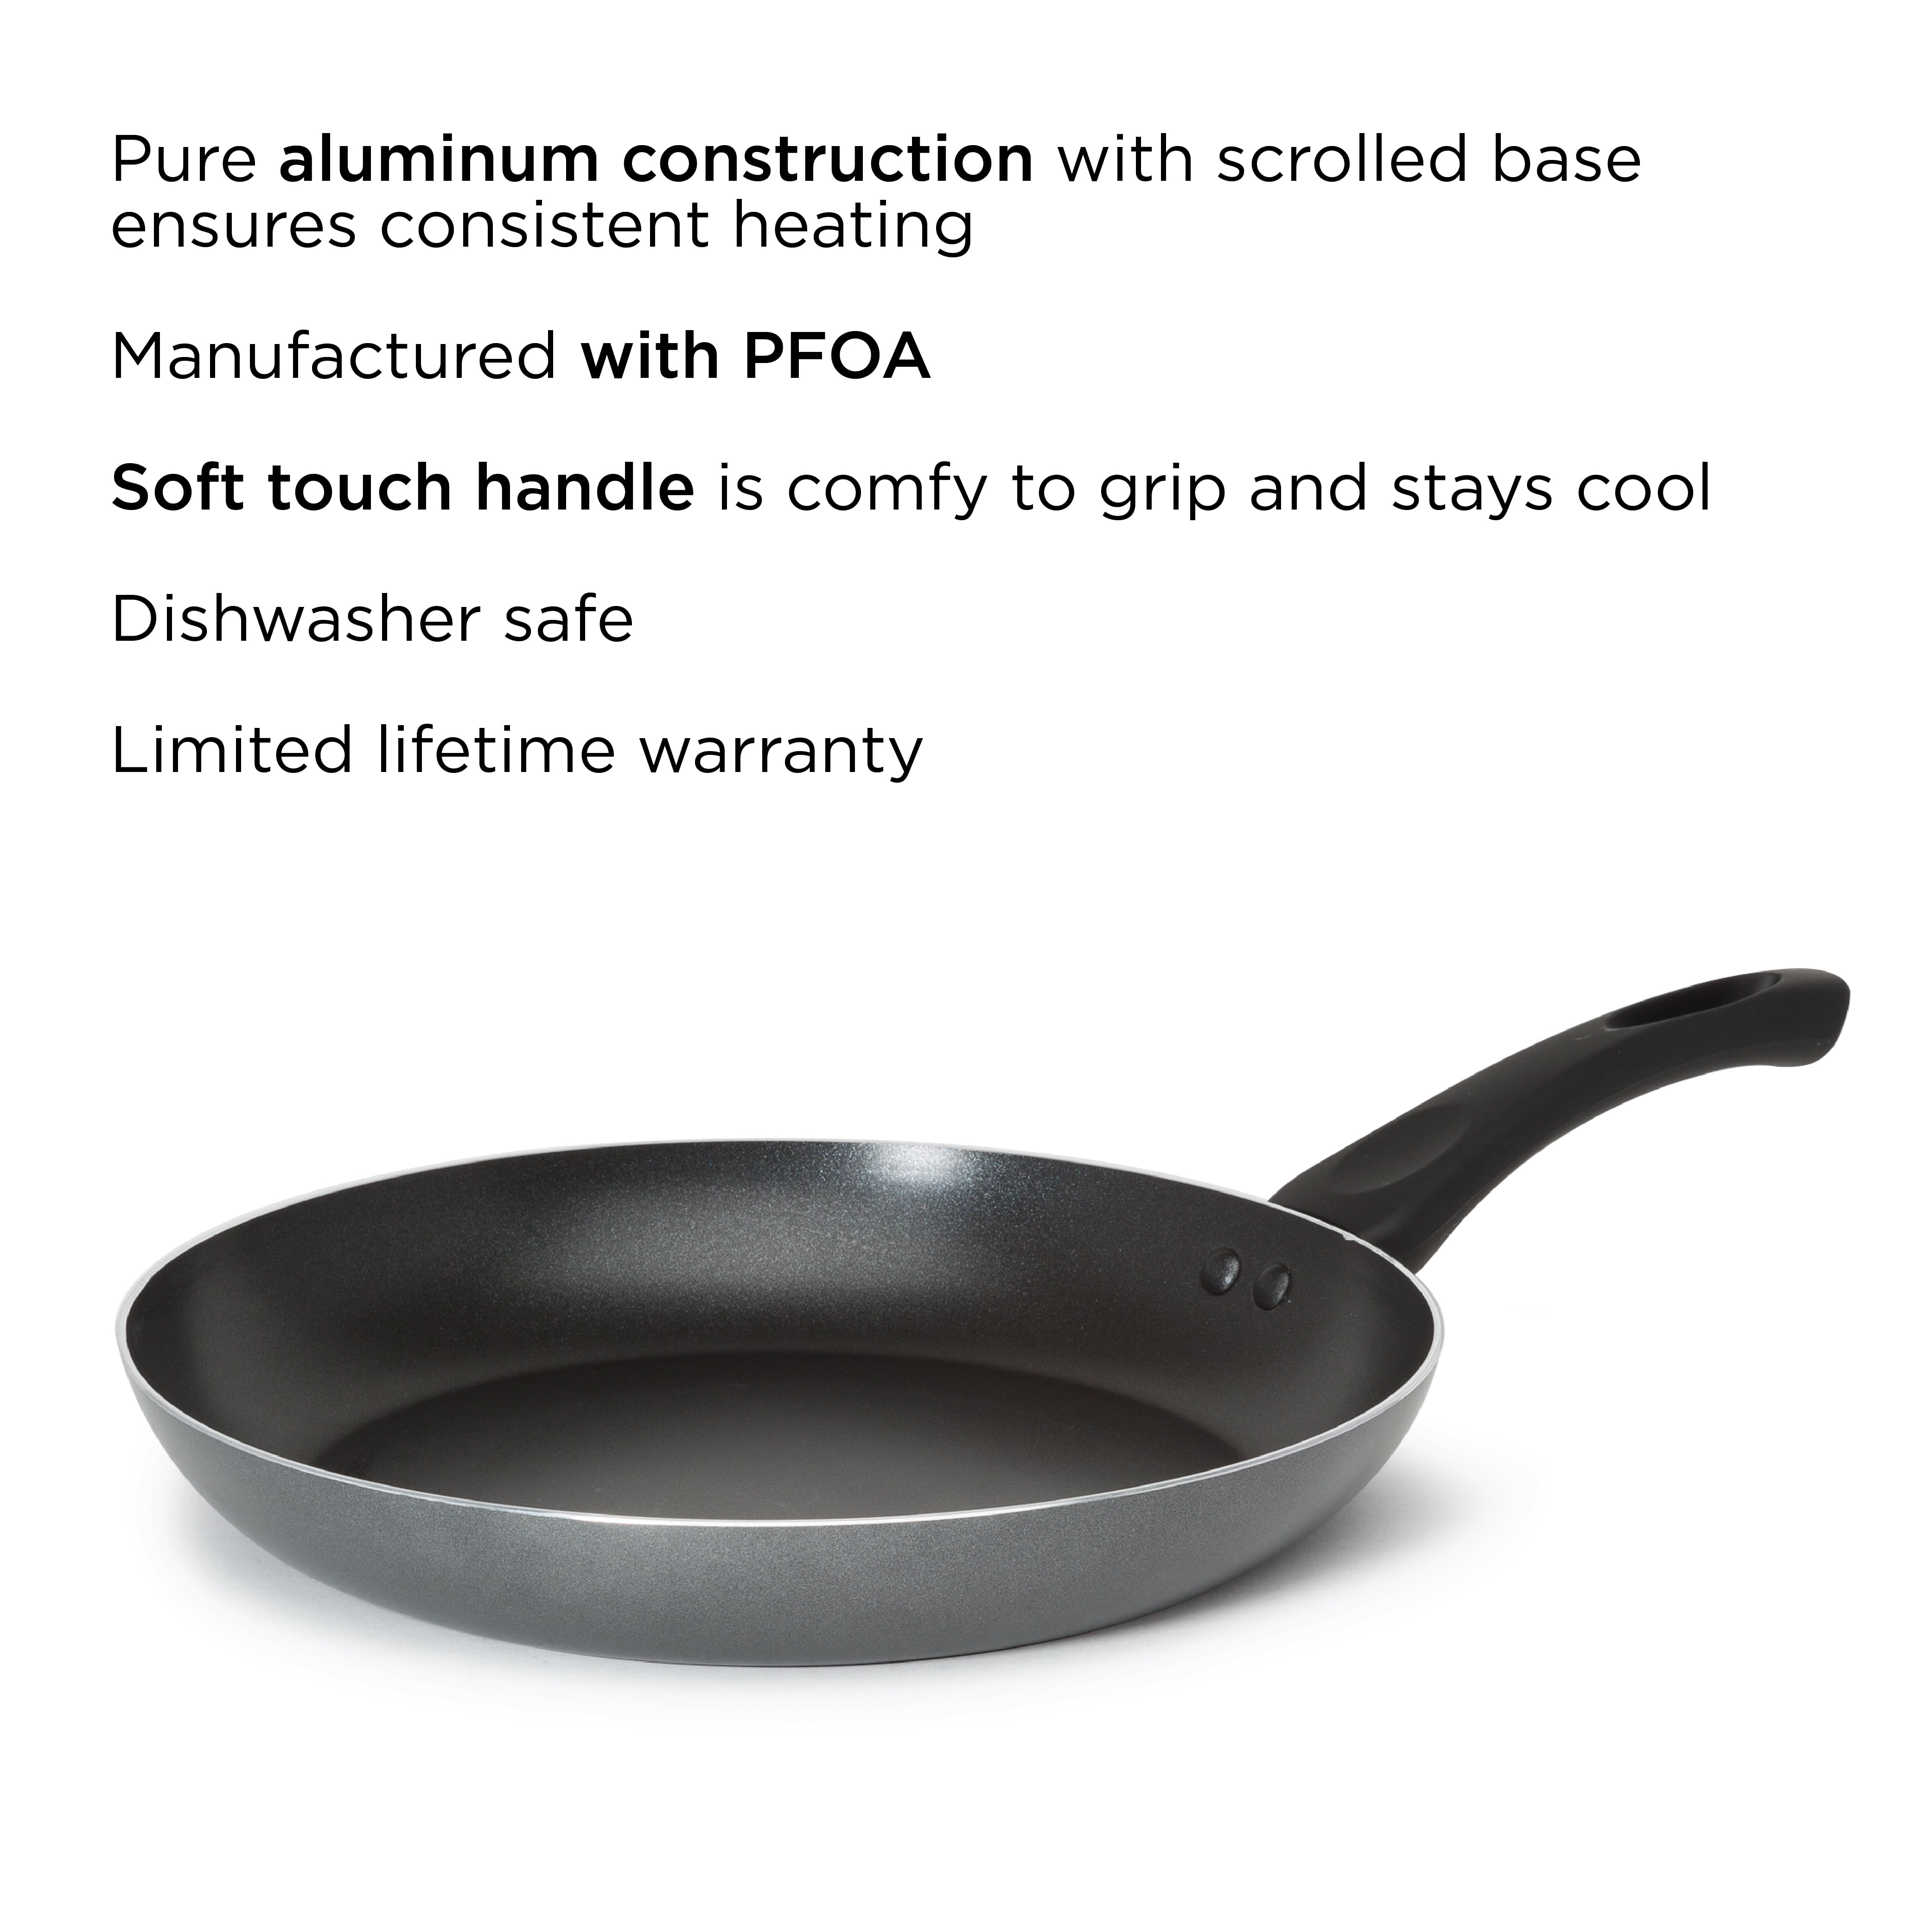 Meyer Earth Pan Grill Pan 28 cm - Frying Pans Recycled Aluminum Grey - 12734